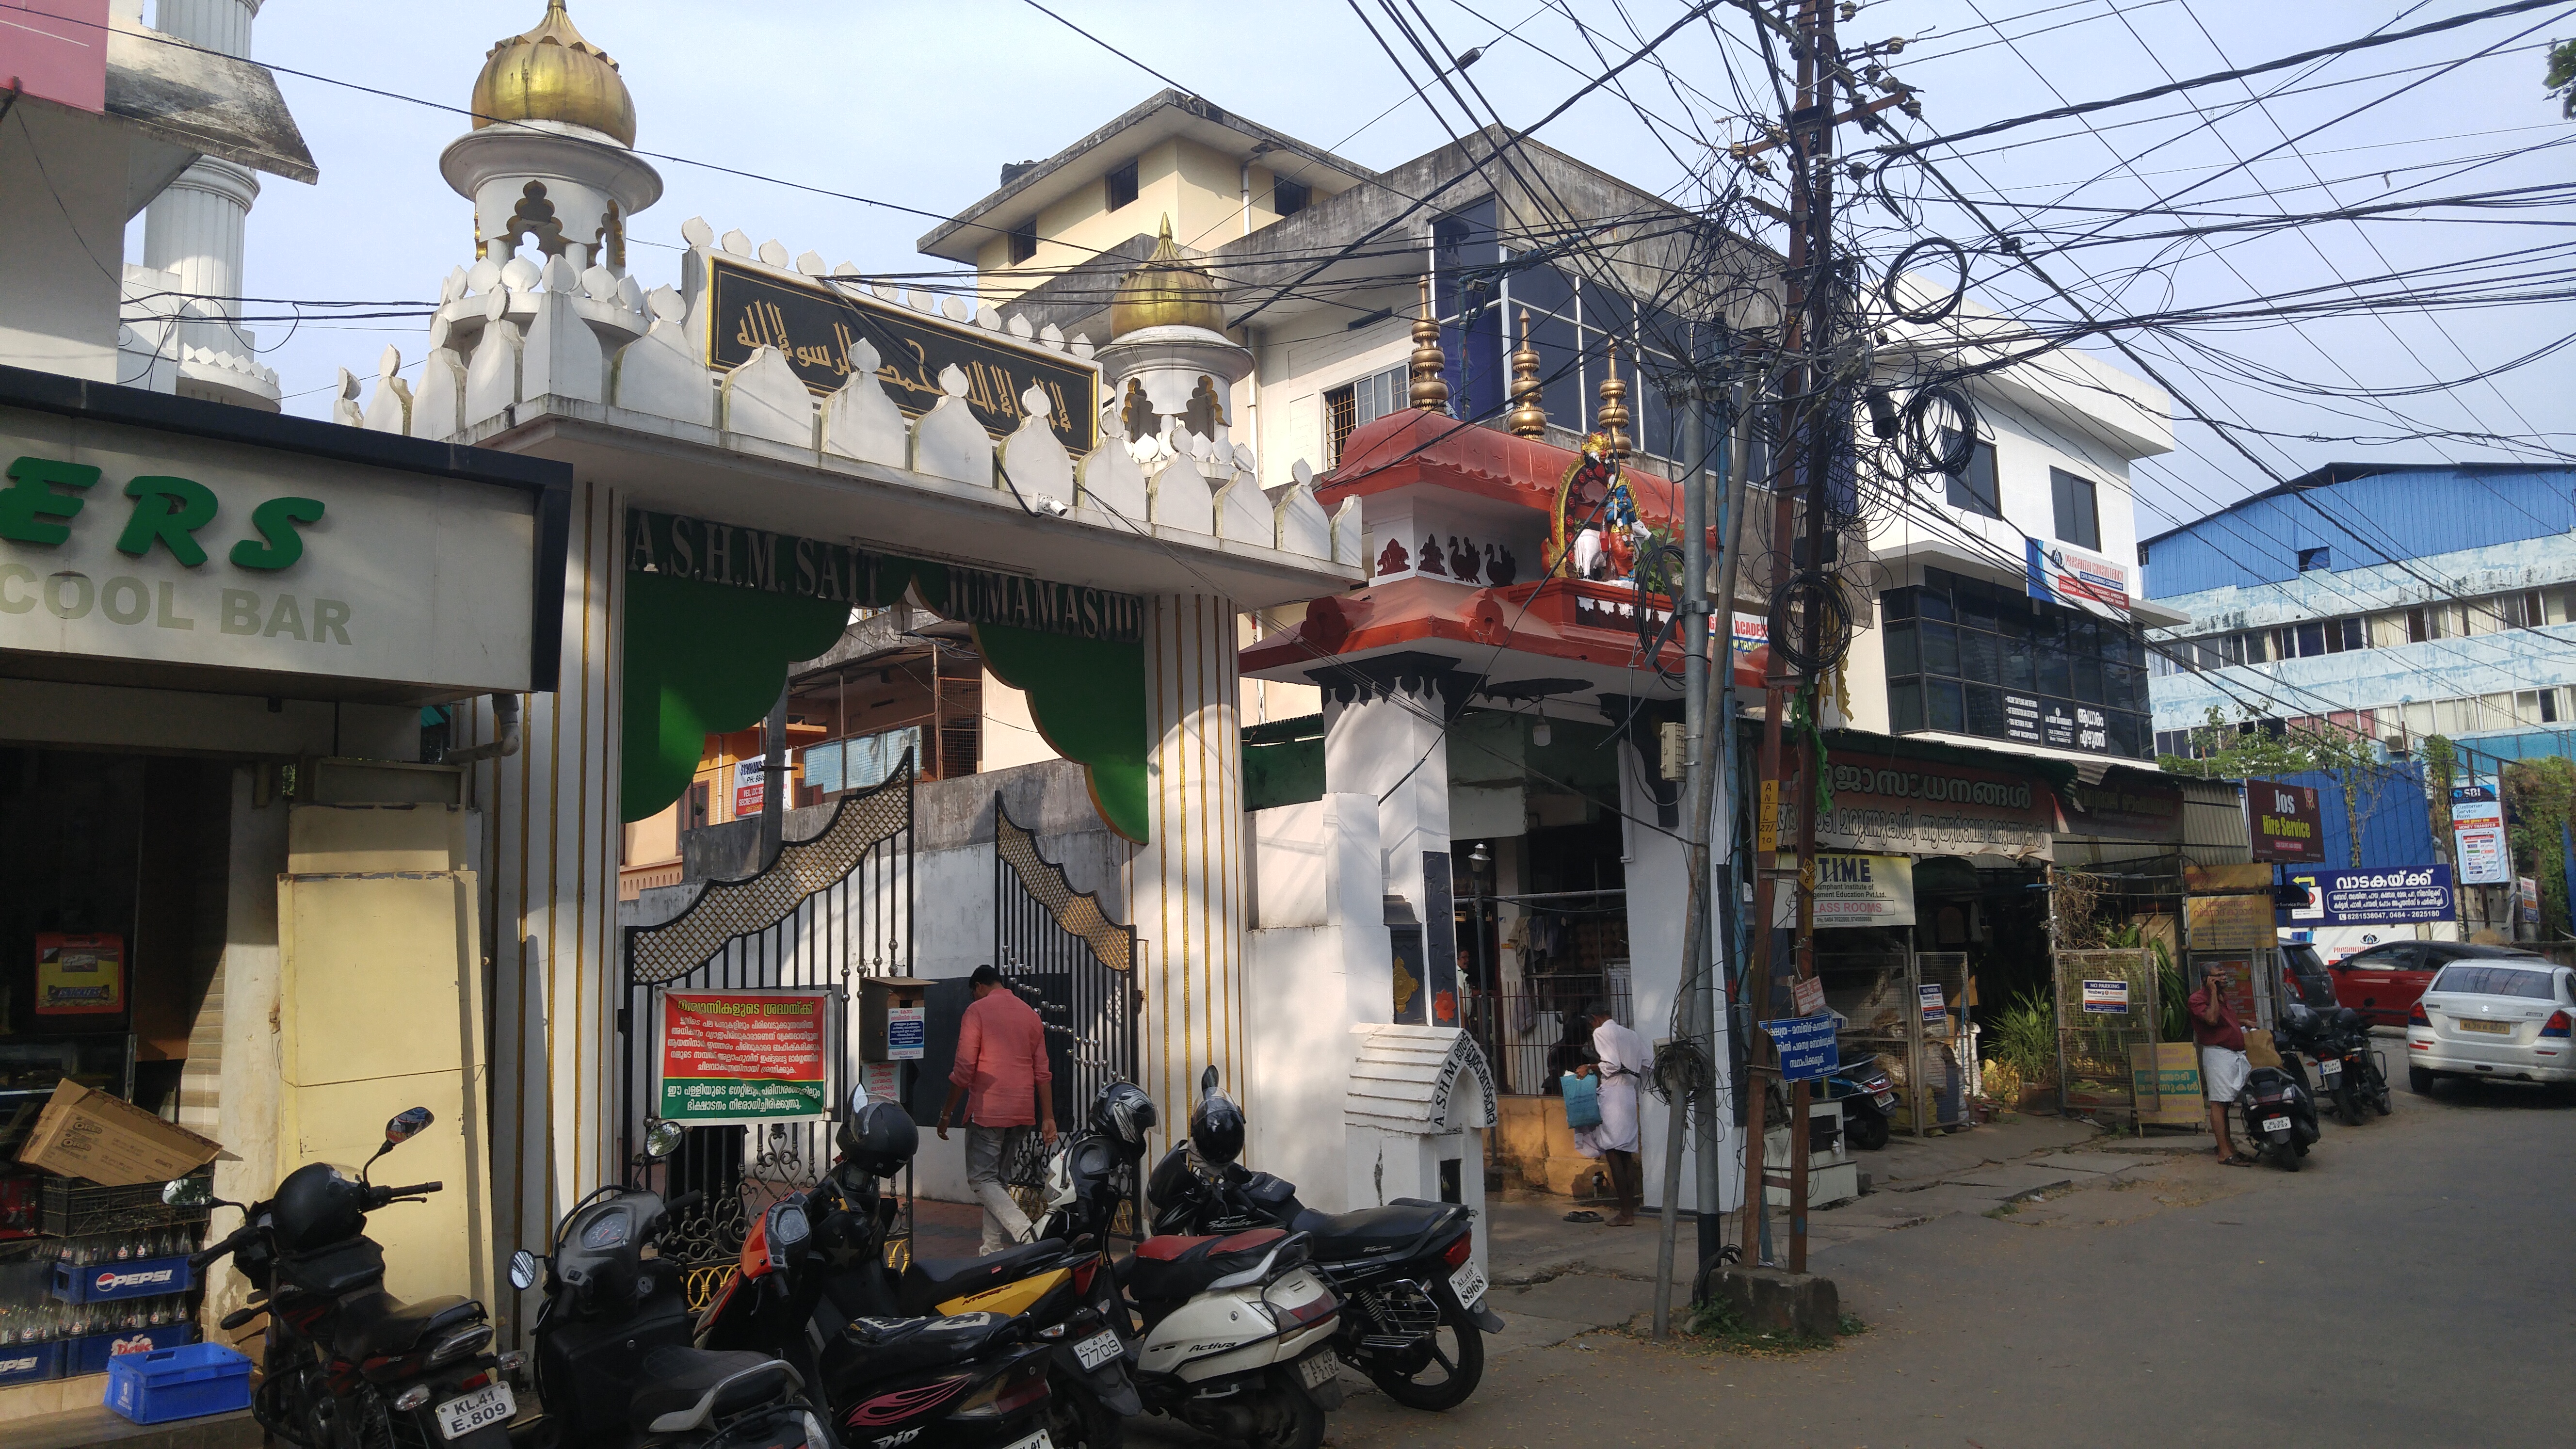 View of buildings on a street in the Indian city of Kochi.